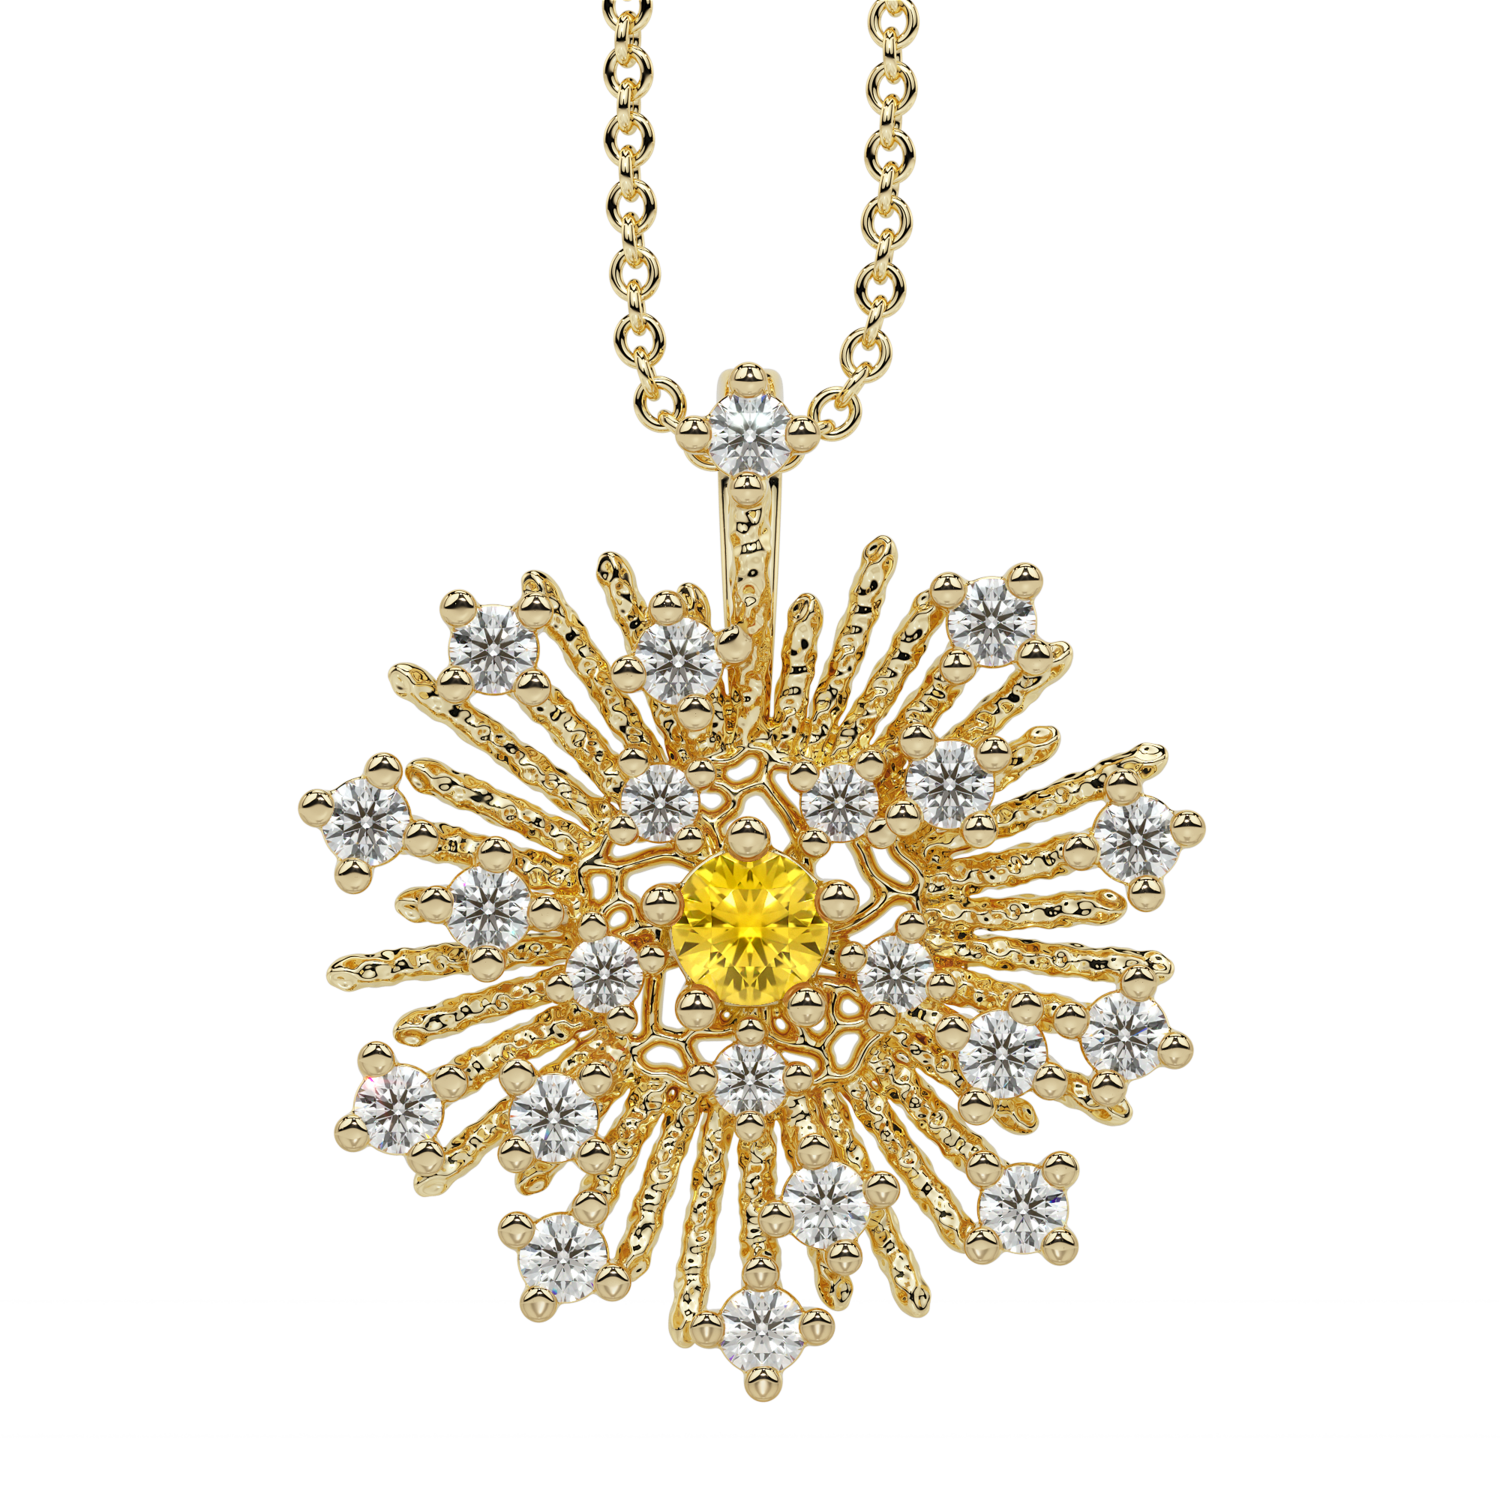 Solid Gold and Diamond Sunburst Necklace or pendant